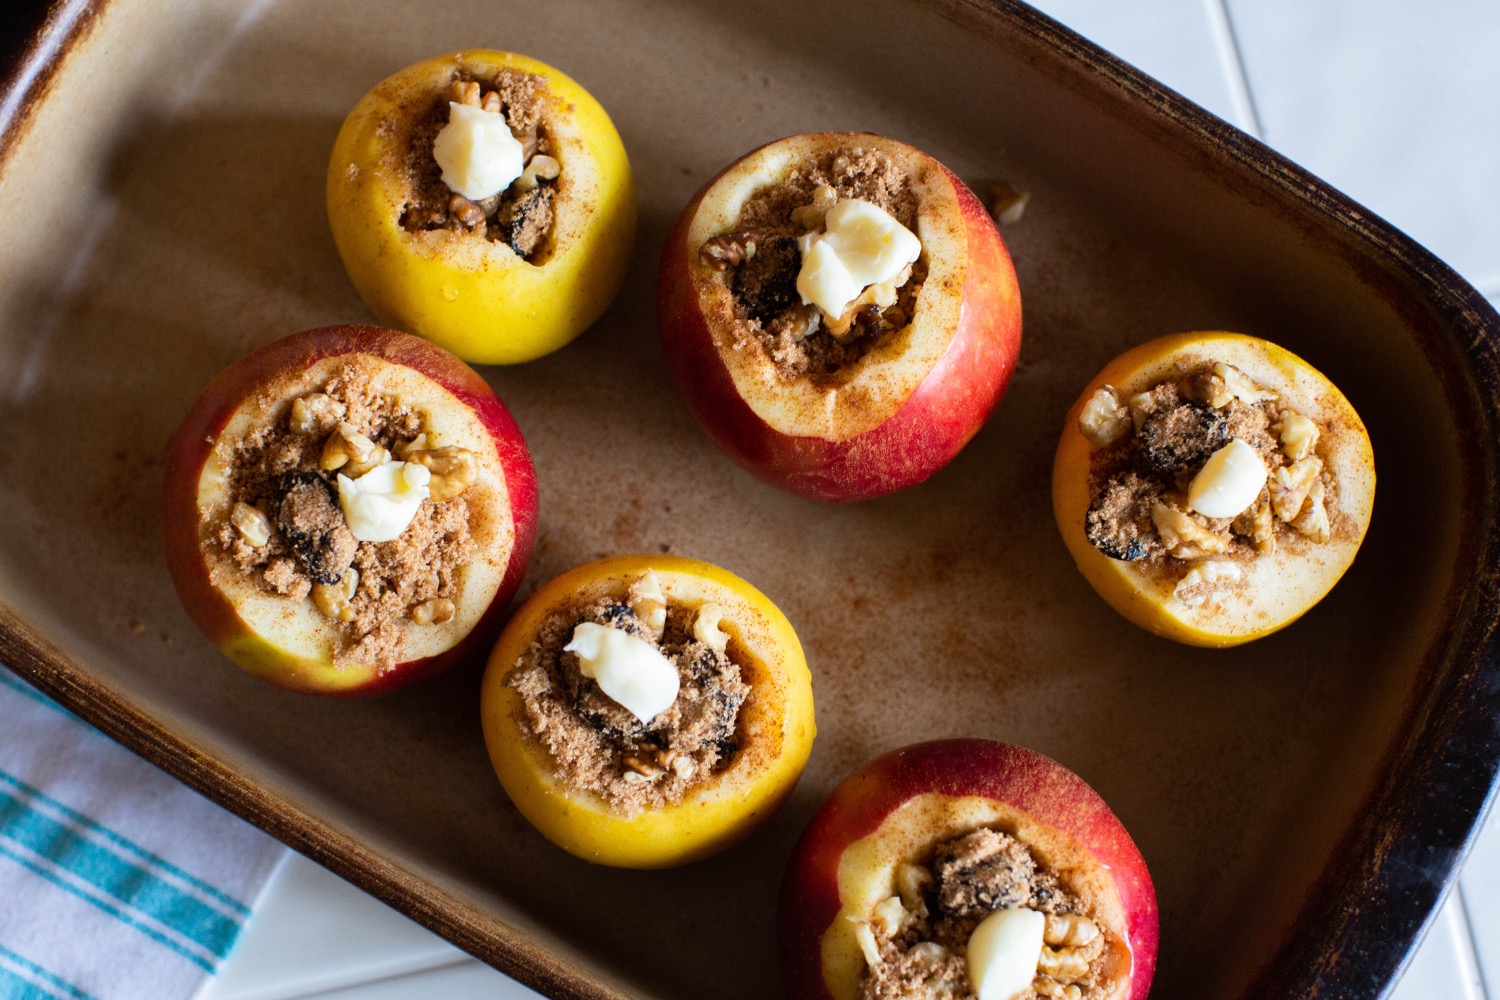 baked apples with cinnamon cherries and walnuts ready to bake